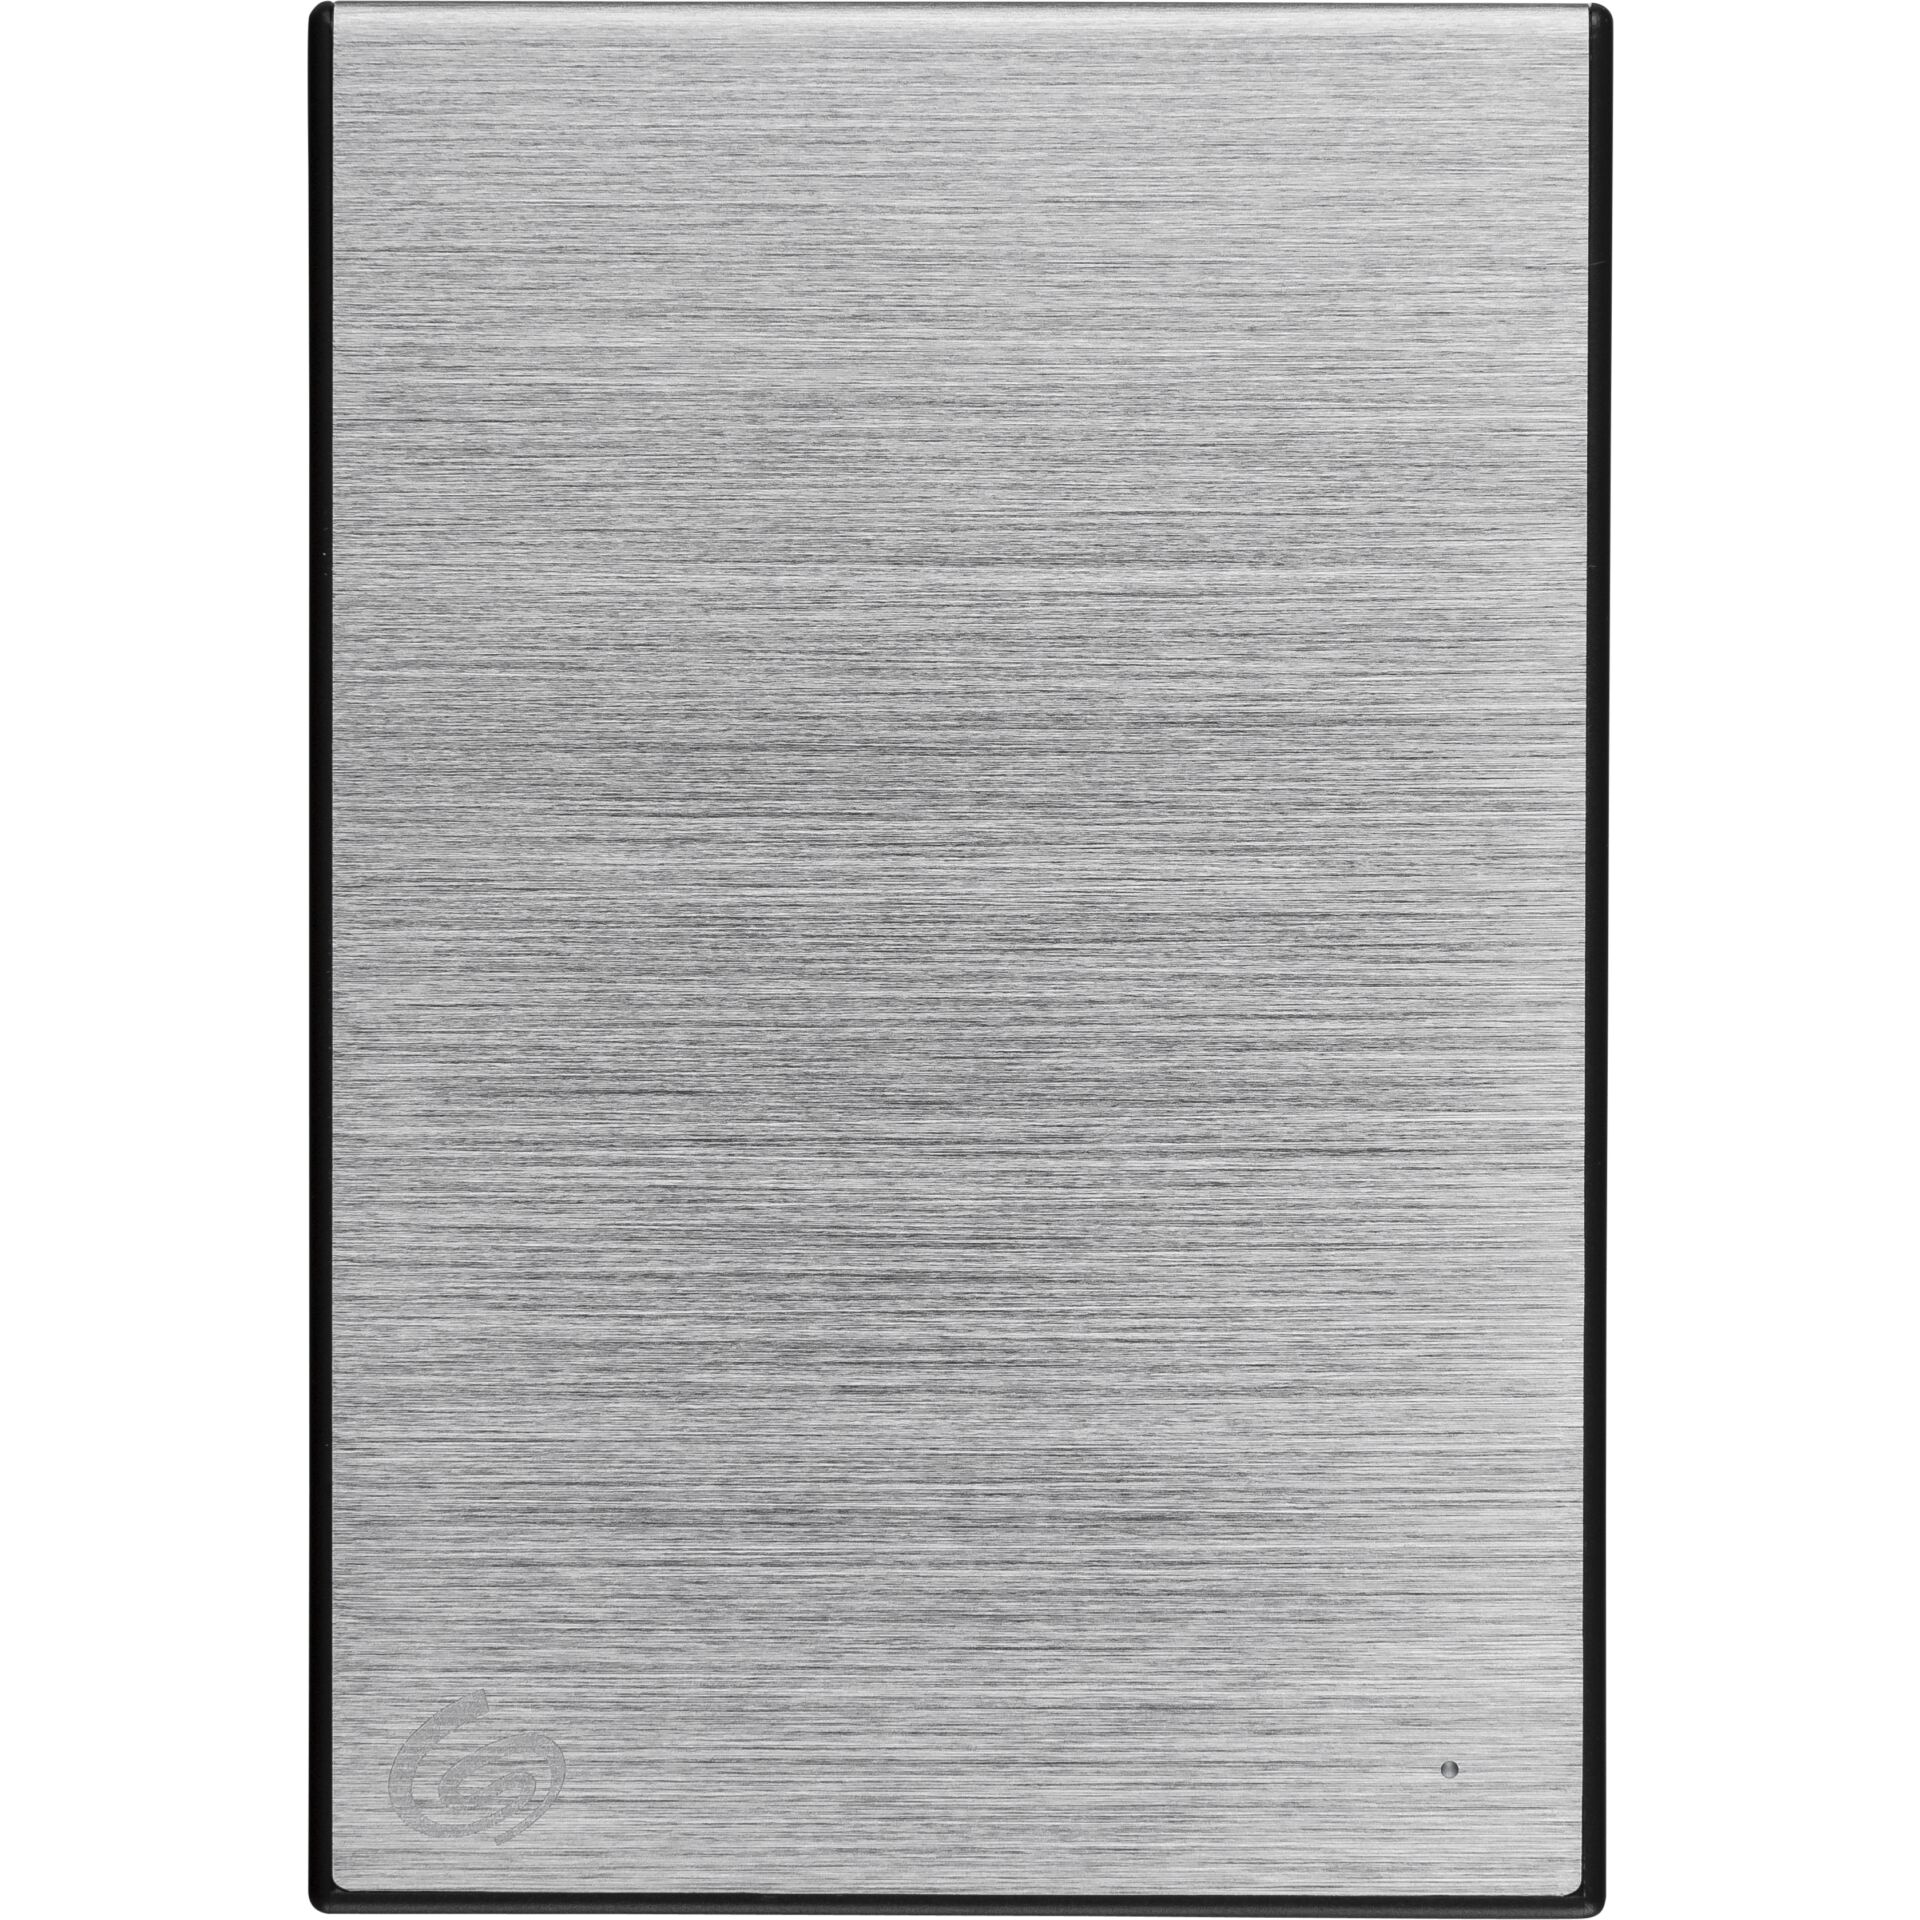 Seagate -Externe Festplatte OneTouch Portable 1 TB -Seagate  Hardware/Electronic